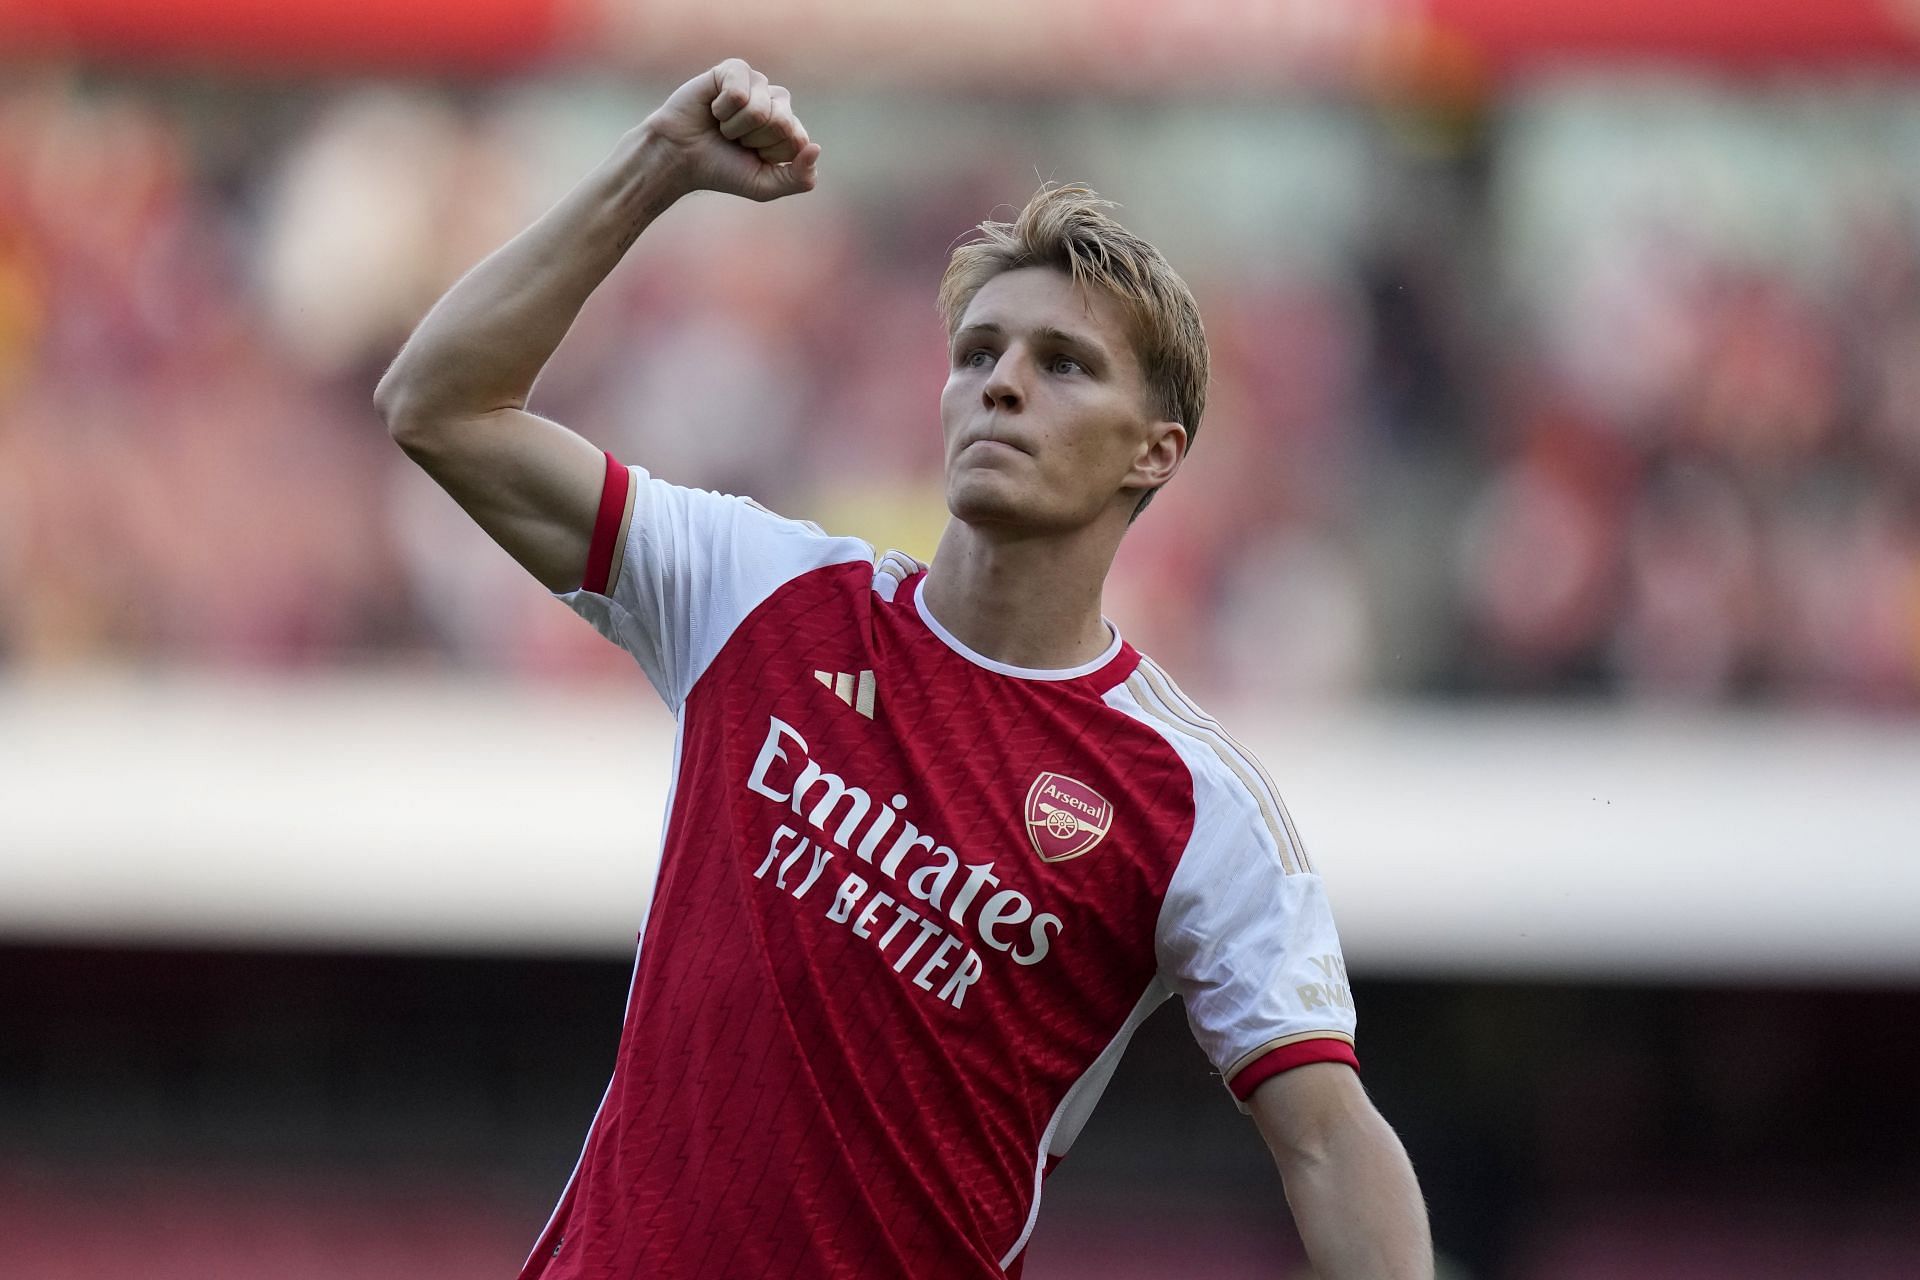 Martin Odegaard has been a revelation at the Emirates so far